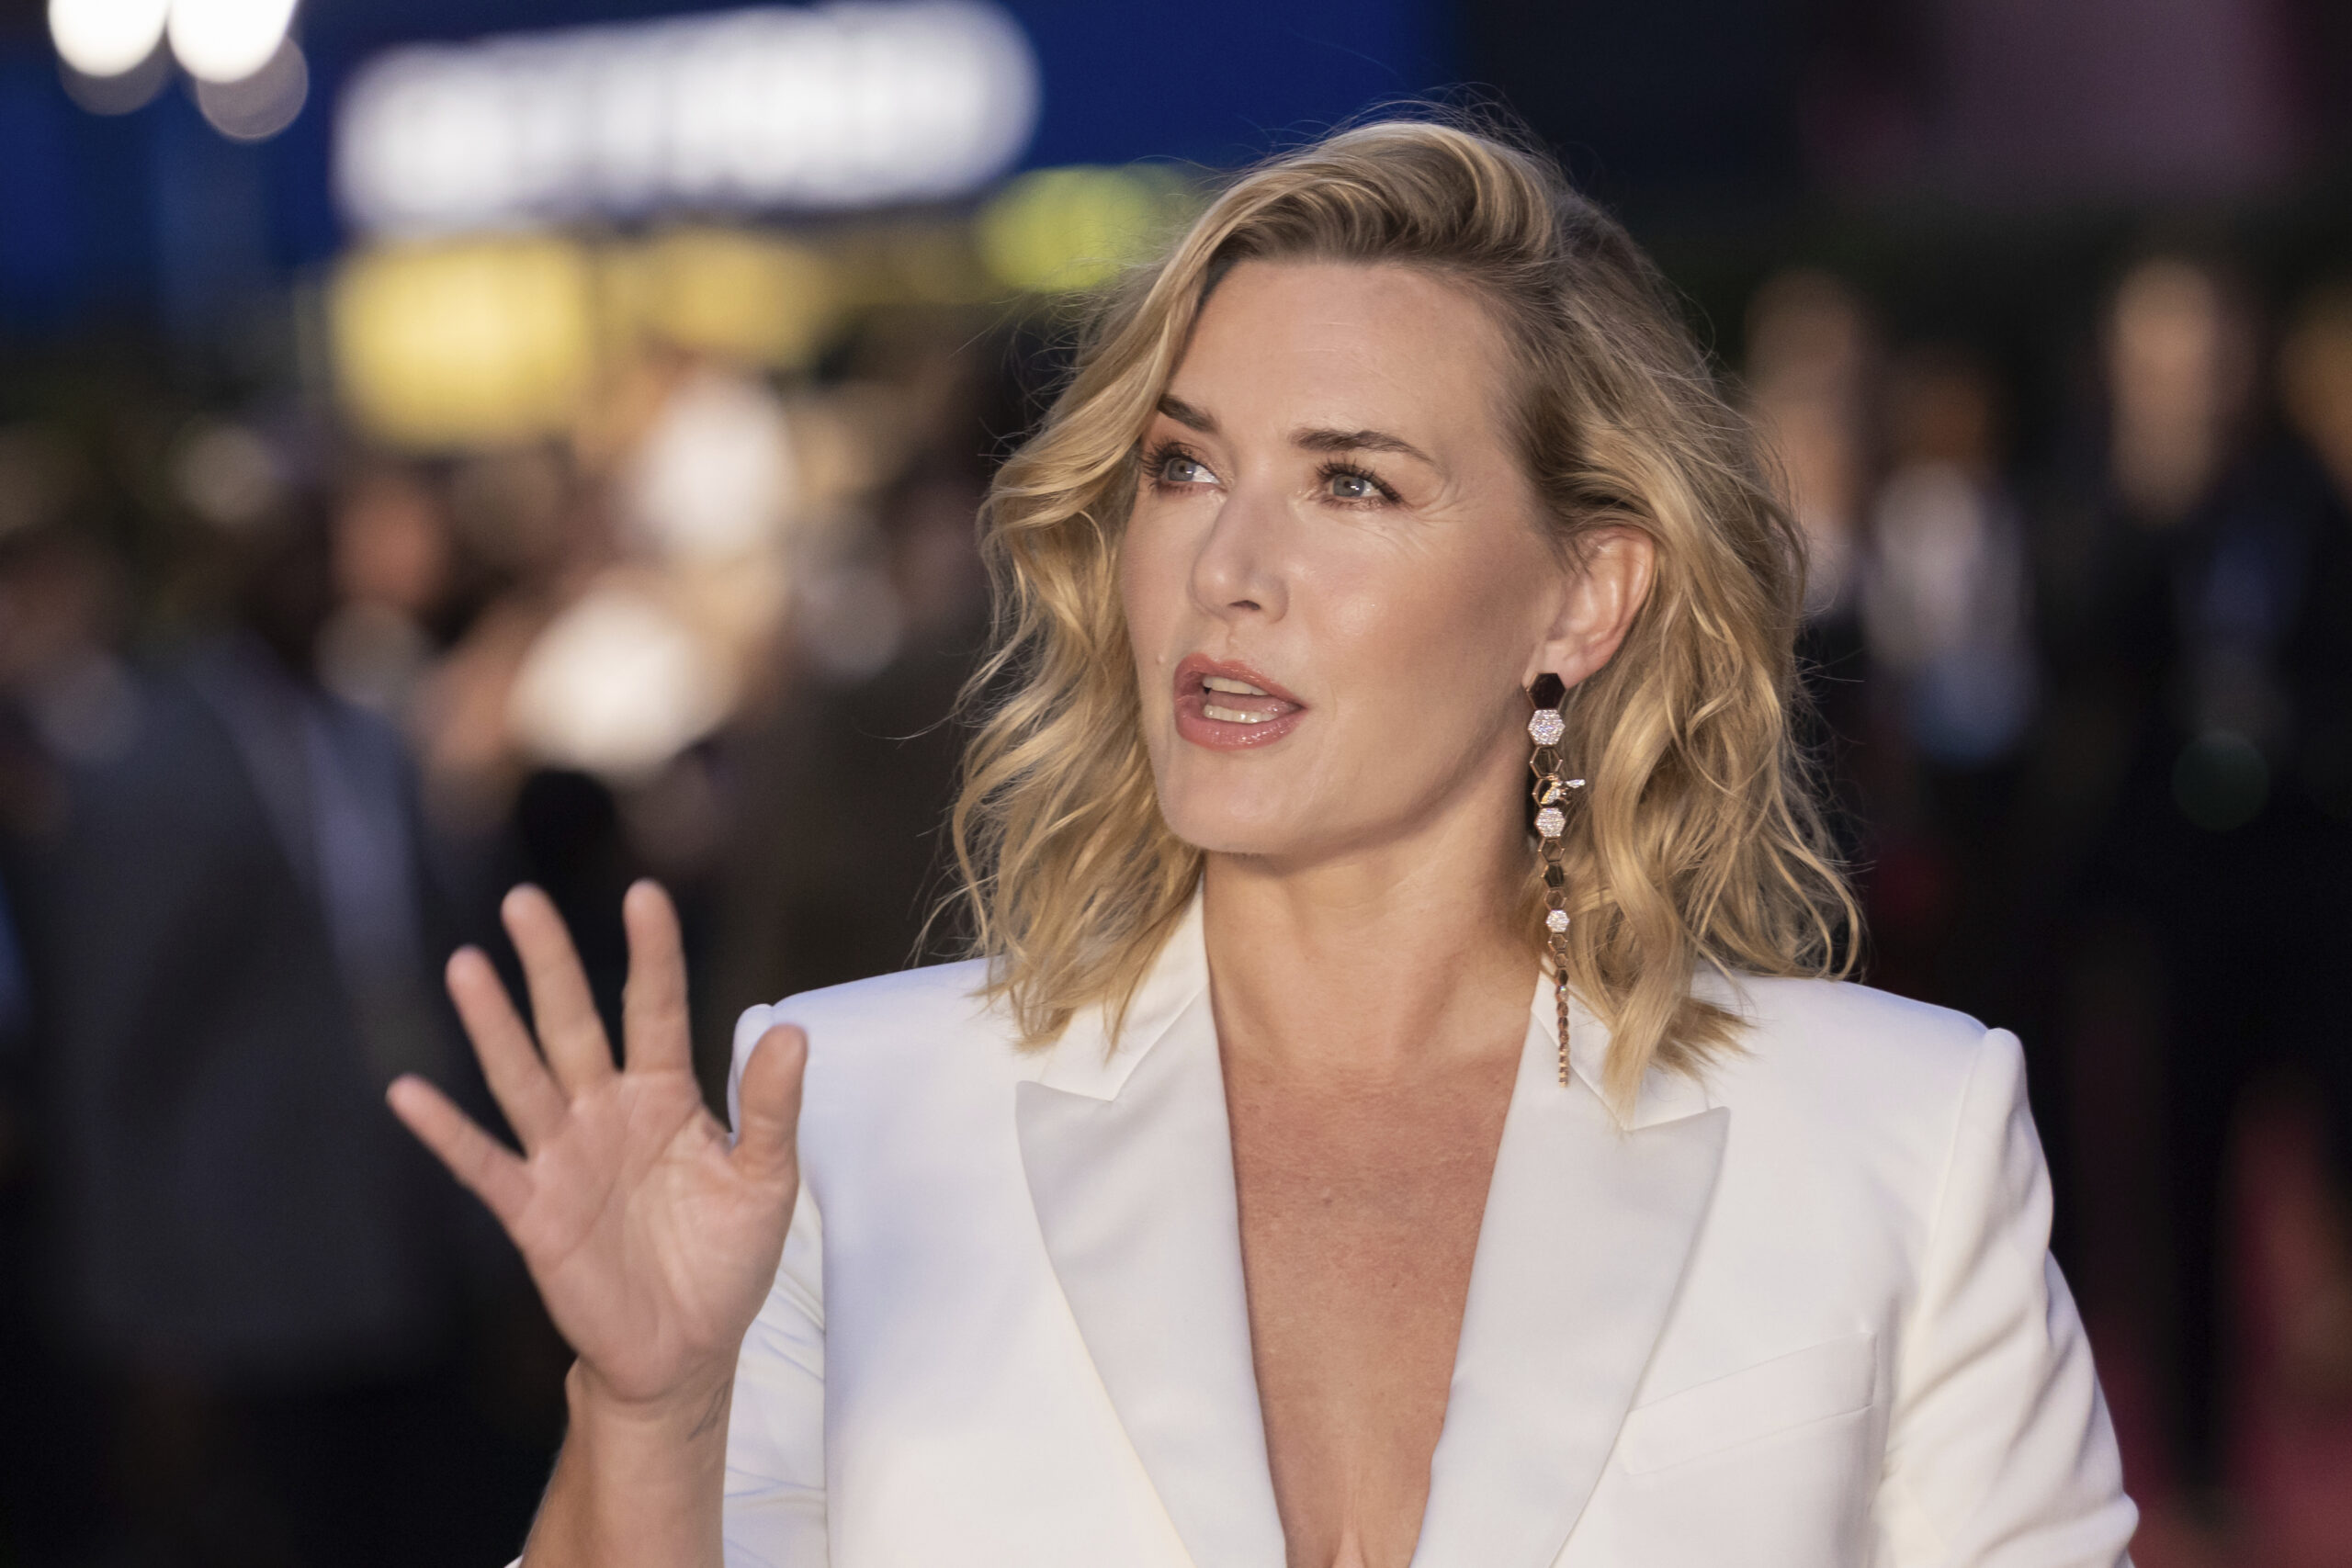 Kate Winslet poses for photographers upon arrival at the Vogue World event on Thursday, Sept. 14, 2023 in London. (Vianney Le Caer/Invision/AP)